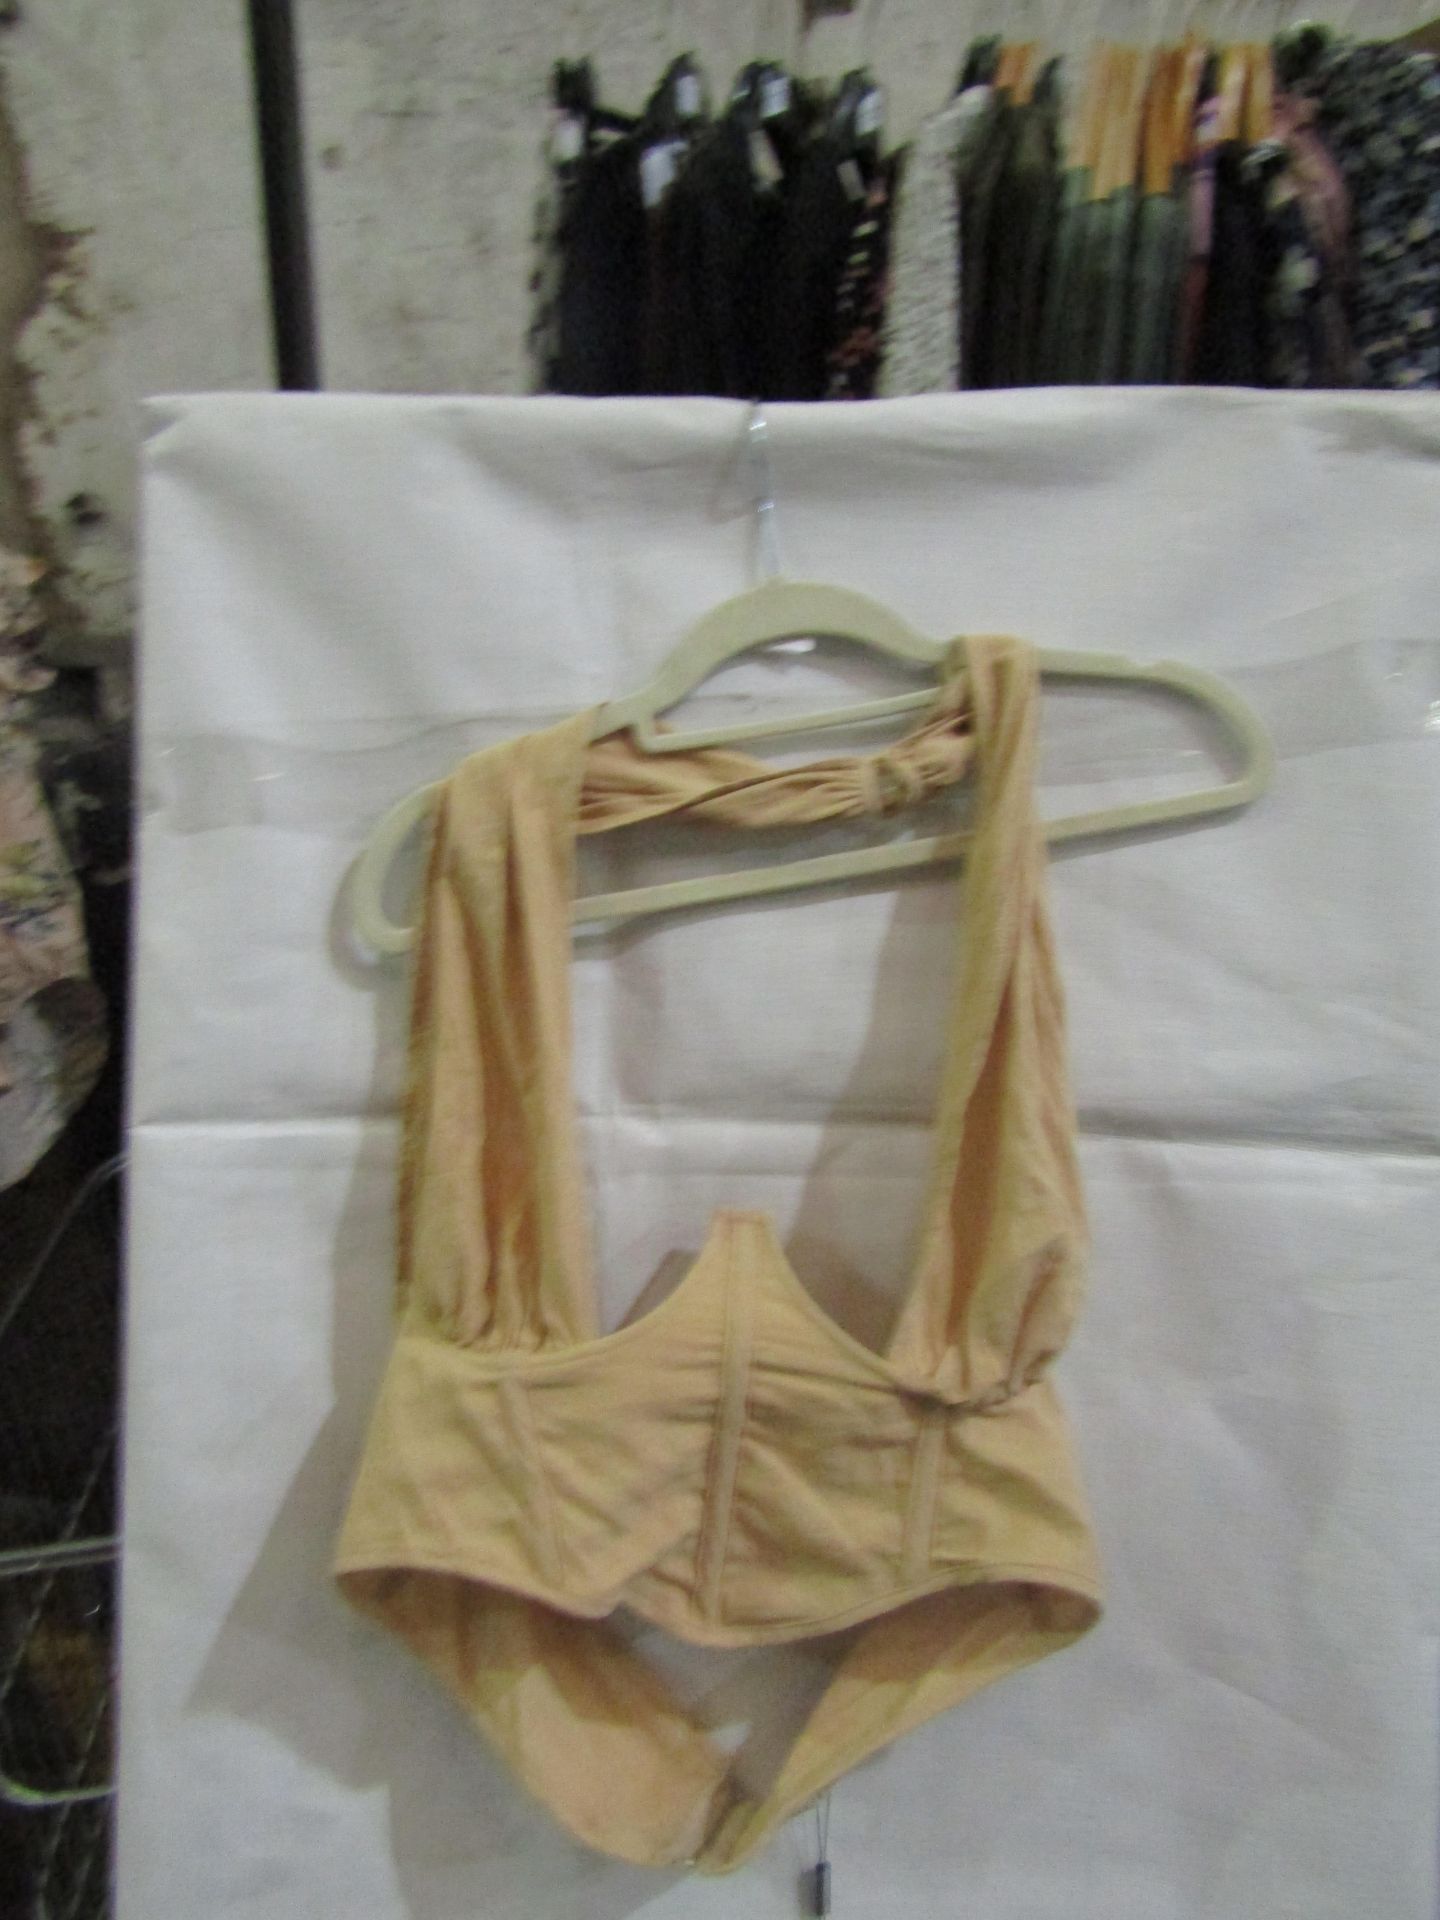 2x Pretty Little Thing Oatmeal Linen Look Cross Front Corset- Size 10, New & Packaged.